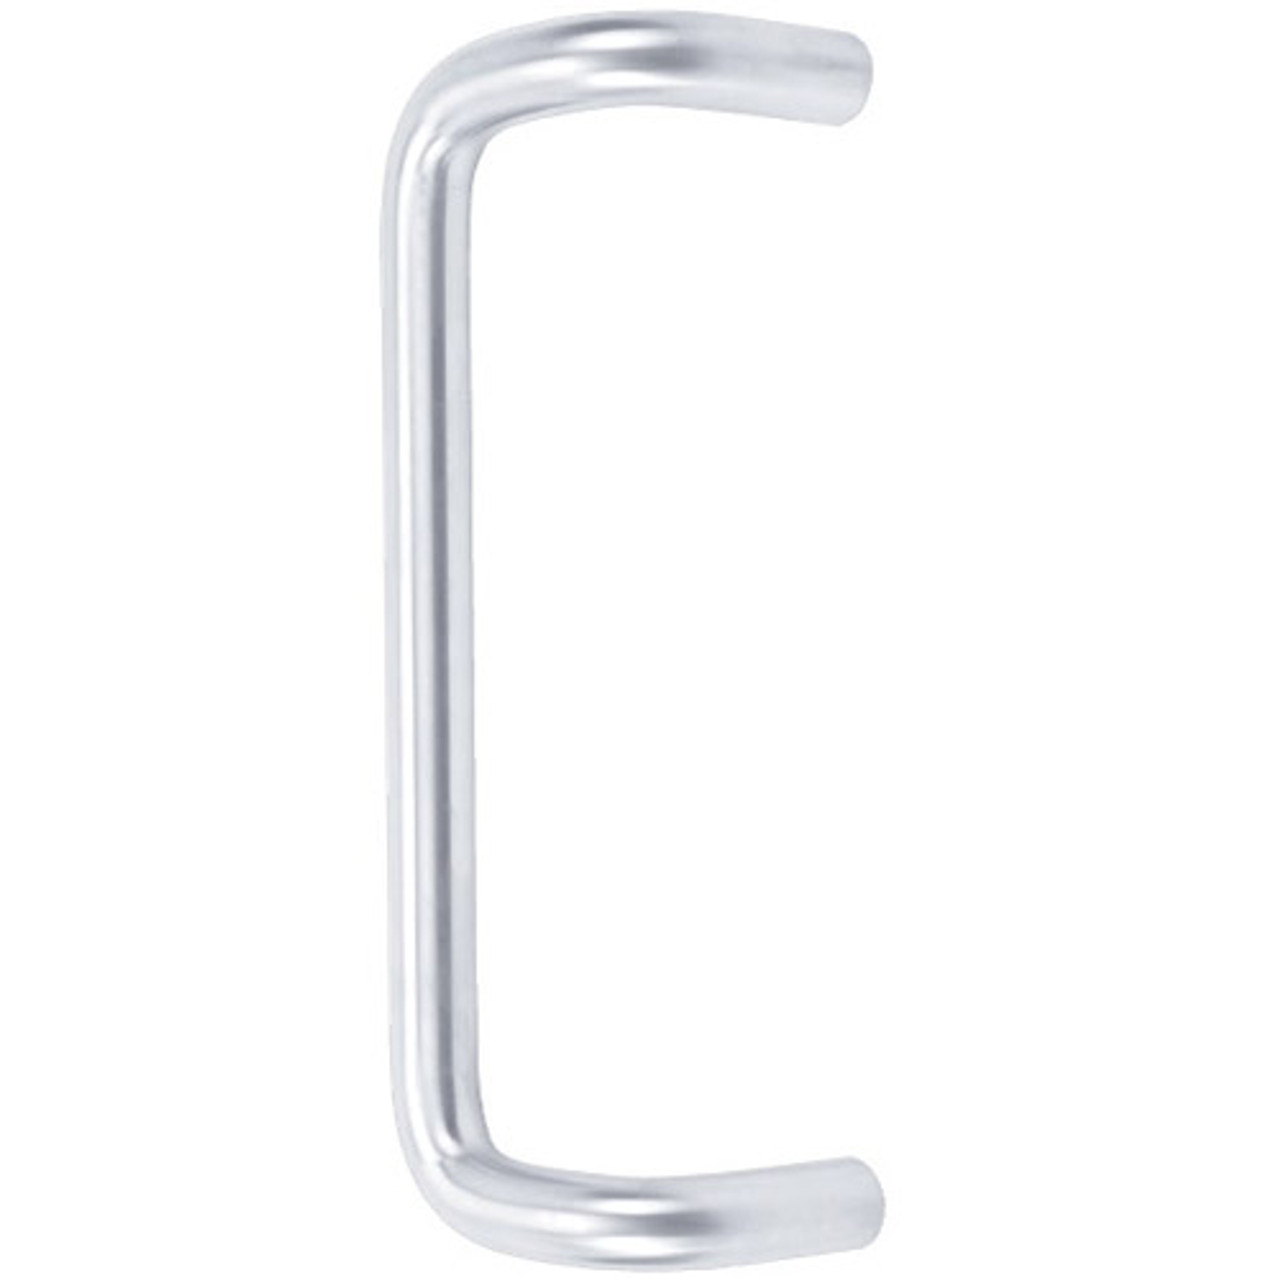 1156-629 Don Jo Offset Door Pull in Bright Stainless Steel Finish